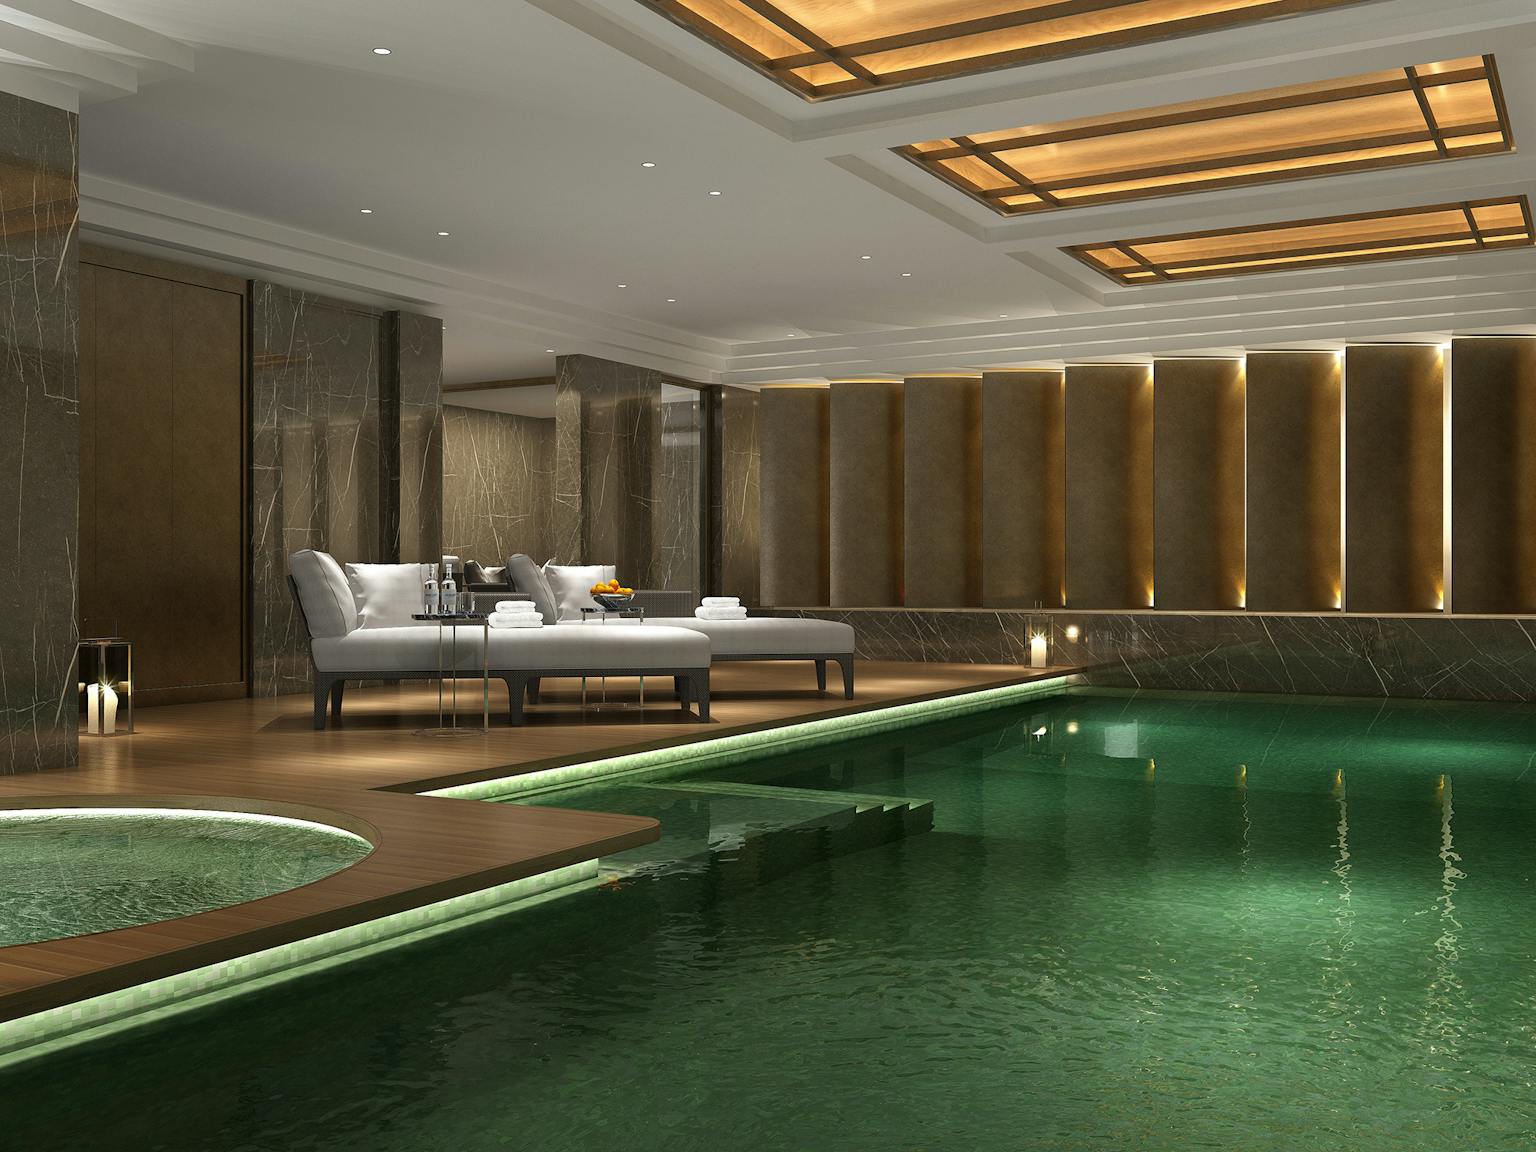 A luxurious spa with swimming pool has been created in the new basement.